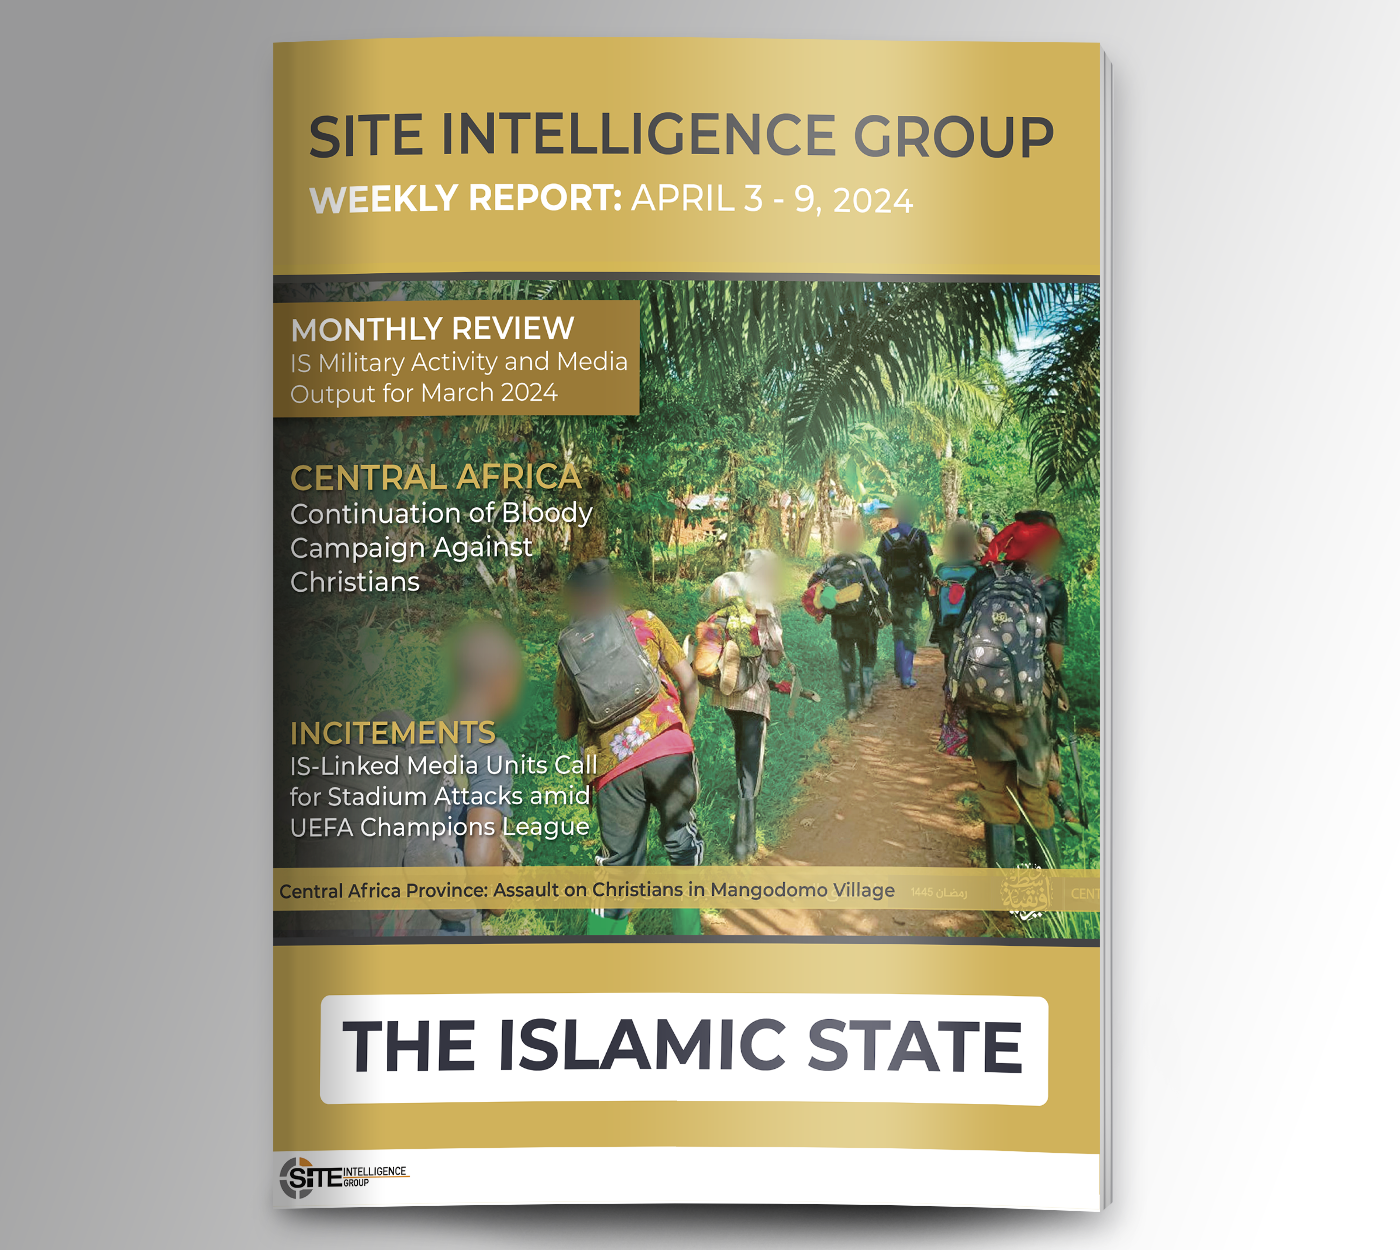 Weekly inSITE on the Islamic State for April 3-9, 2024